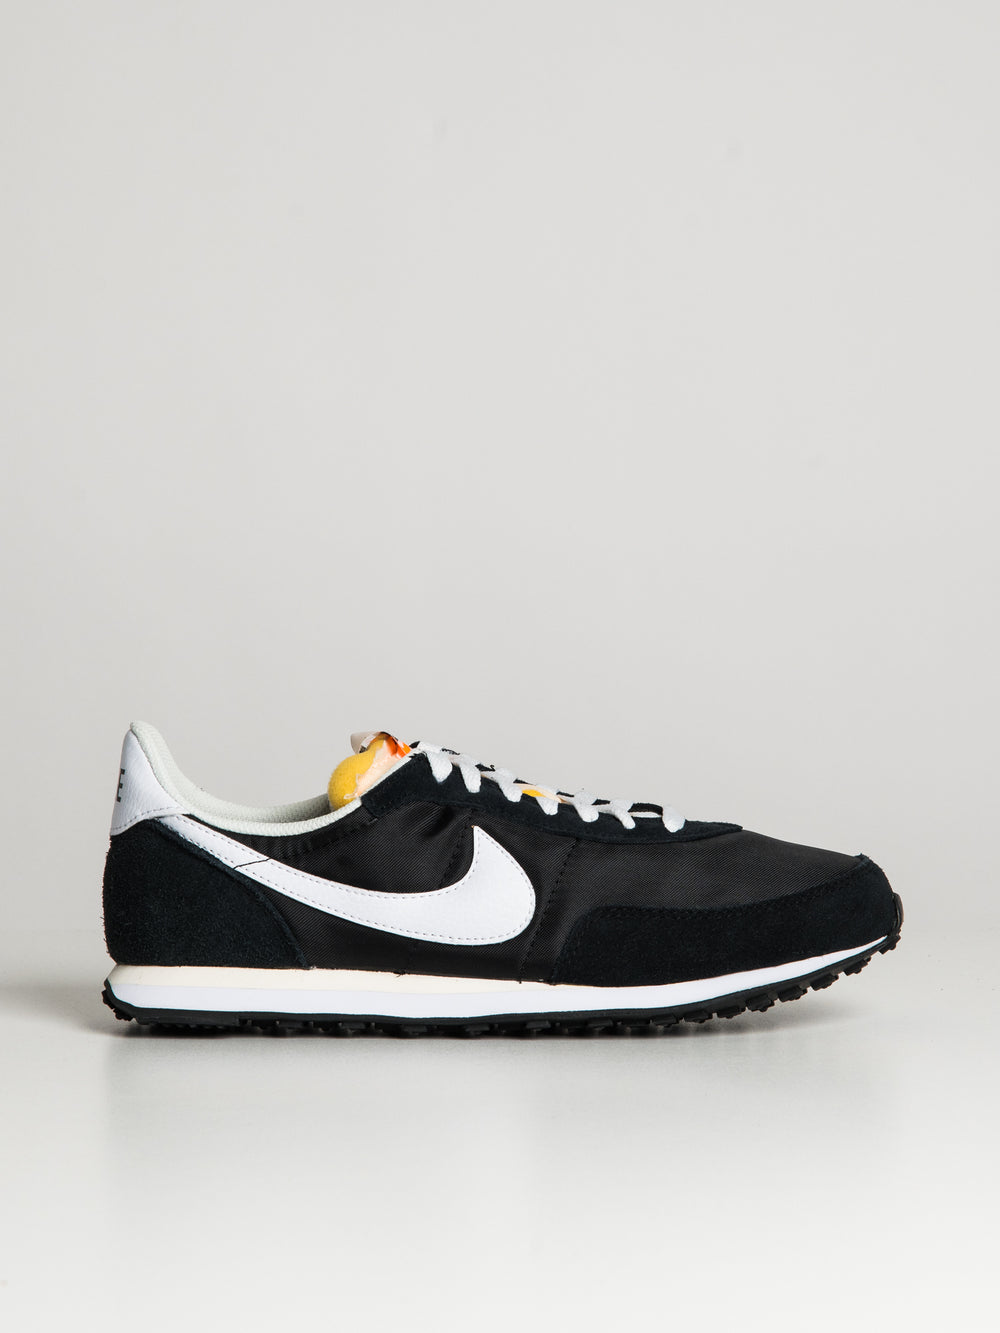 MENS NIKE WAFFLE TRAINER 2 SNEAKERS - CLEARANCE